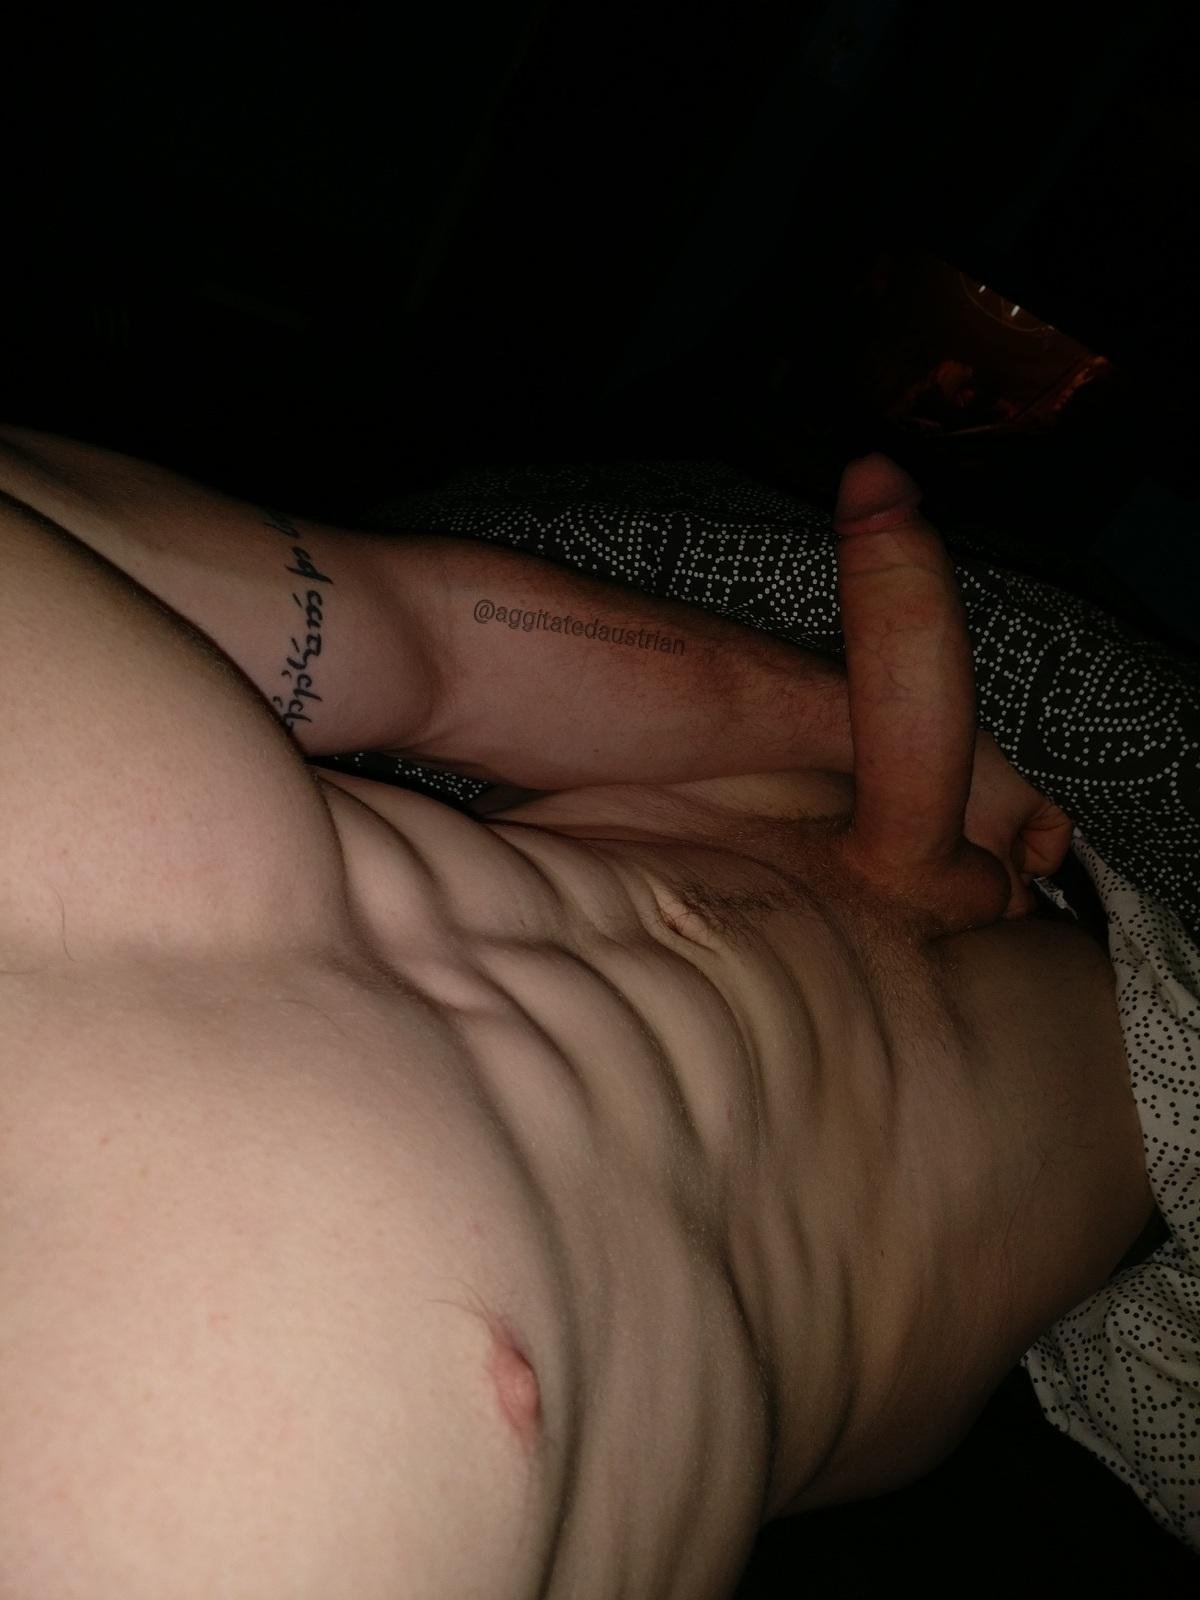 r/ladyboners didn't appreciate (my fuck up) but here is take 2!